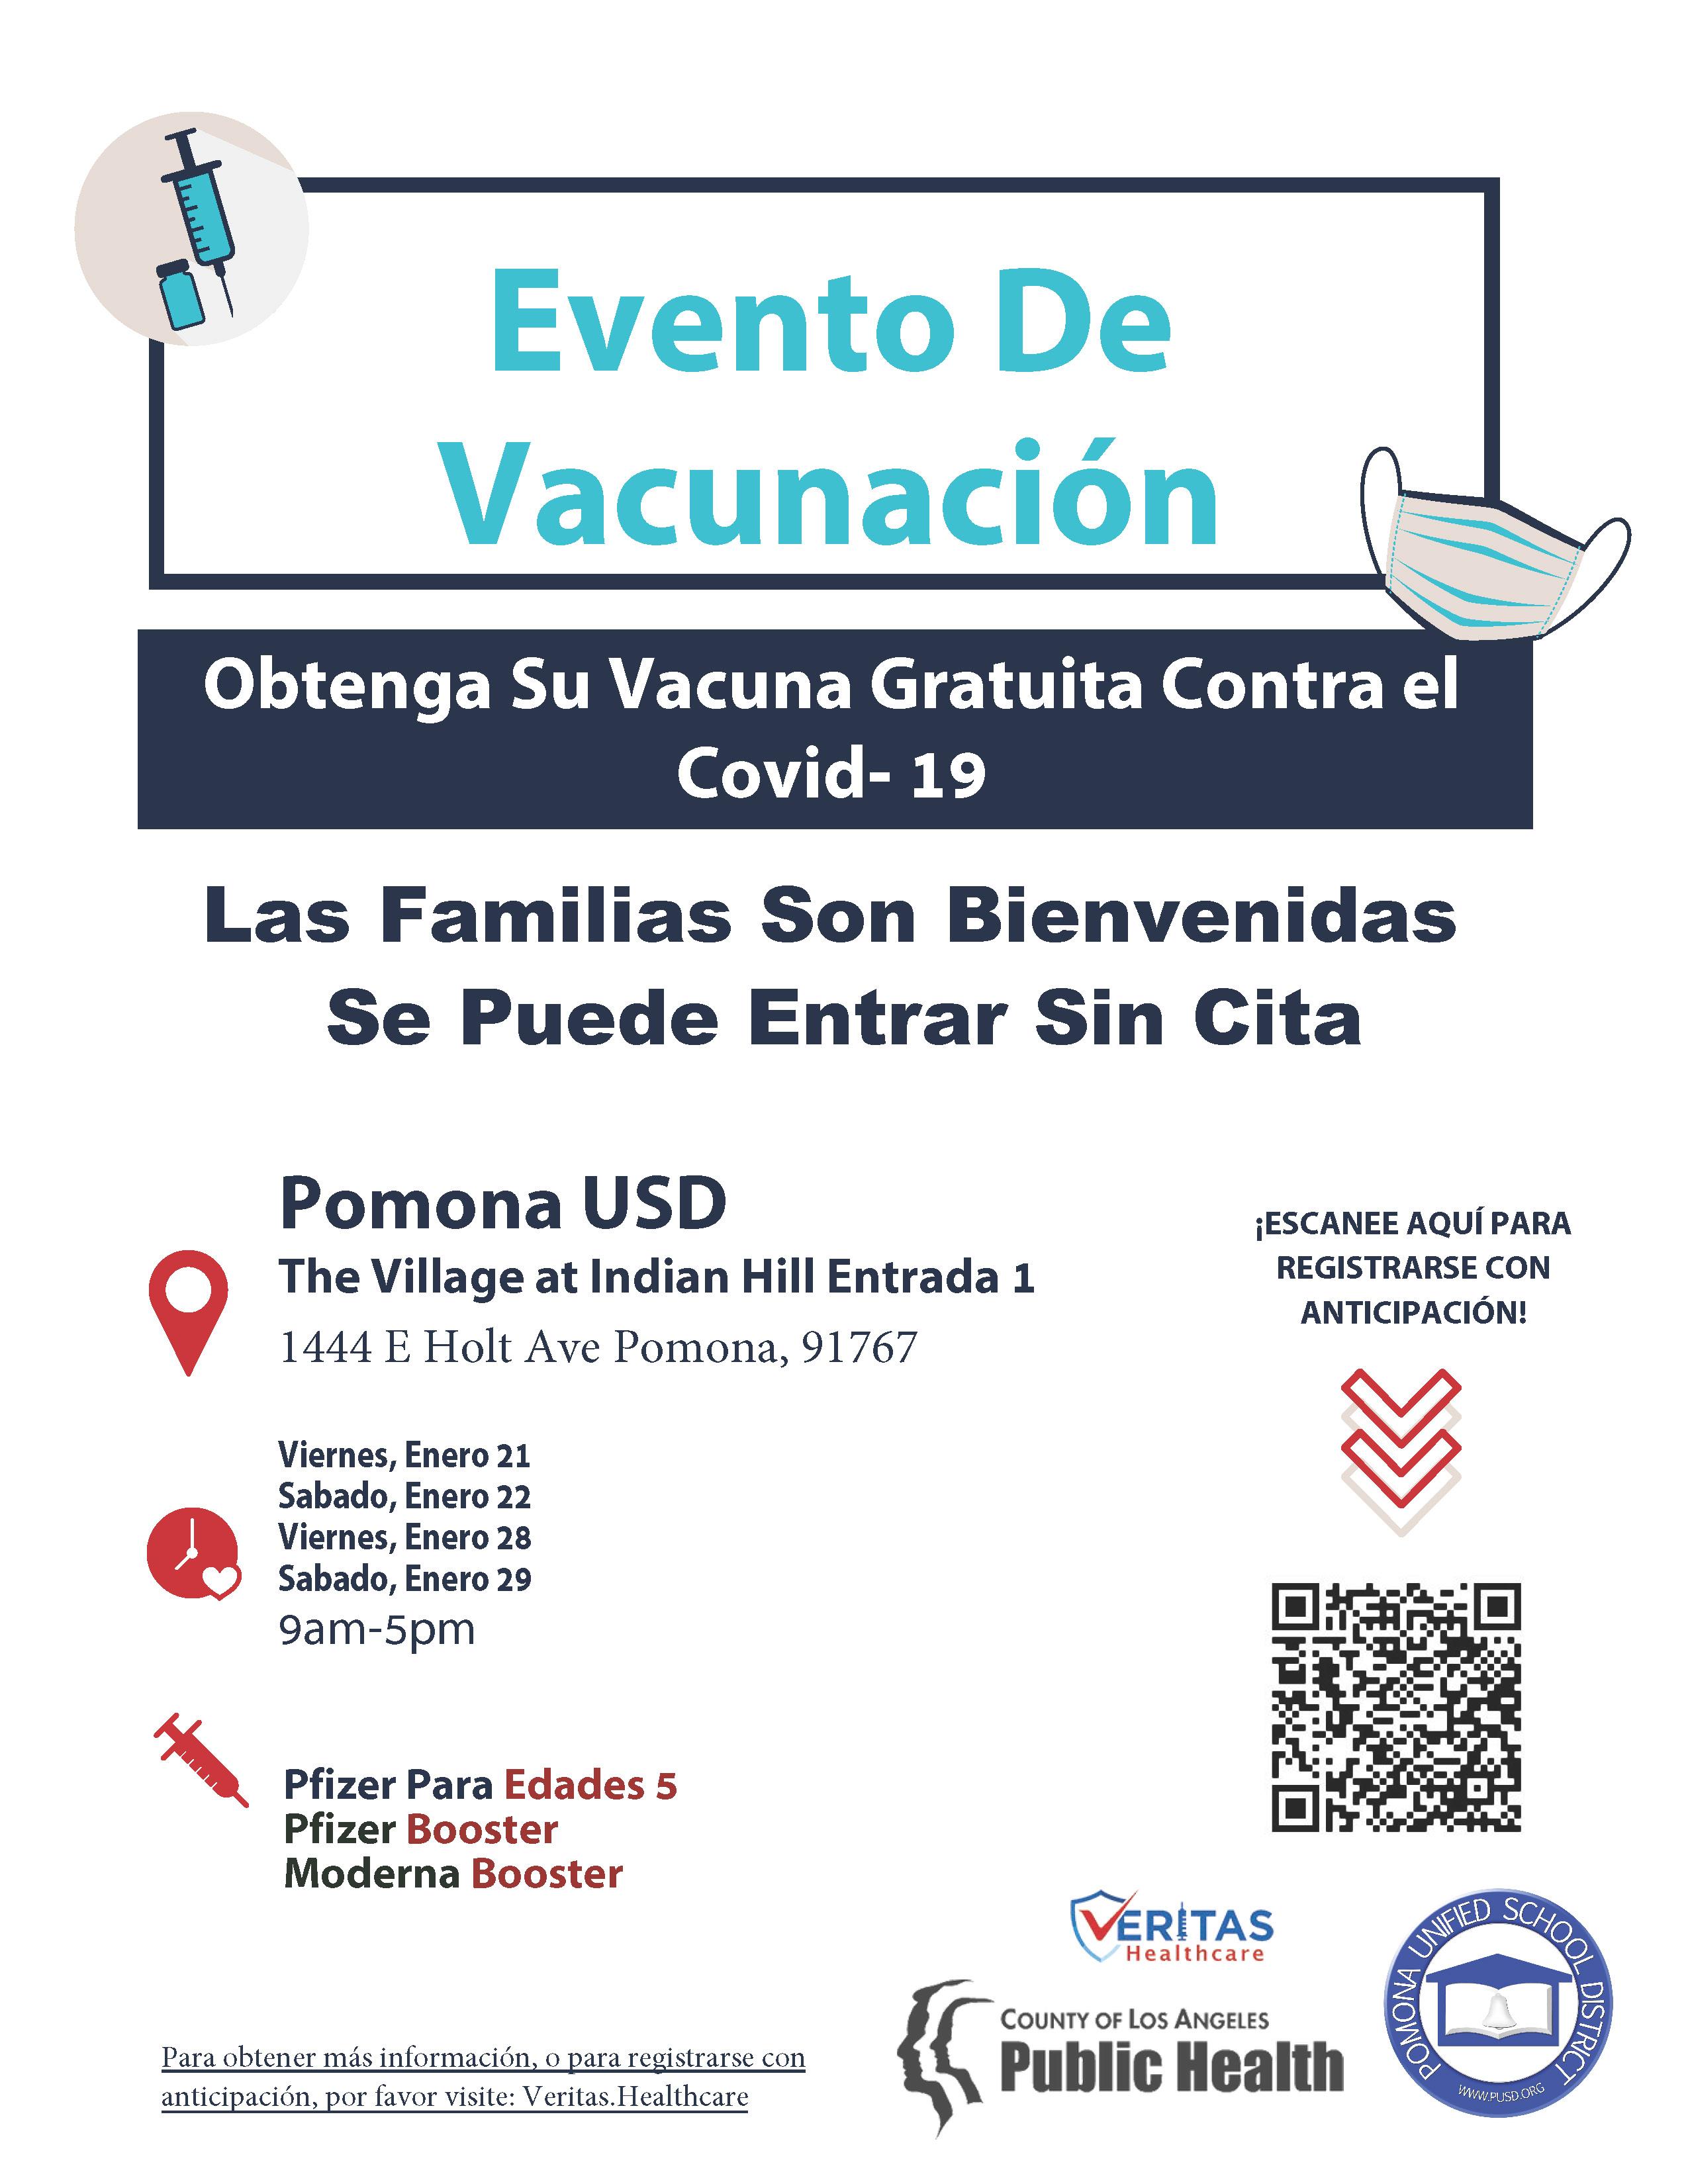 Mobile Vaccine Clinic Events January 21st, 22nd, 28th, and 29th